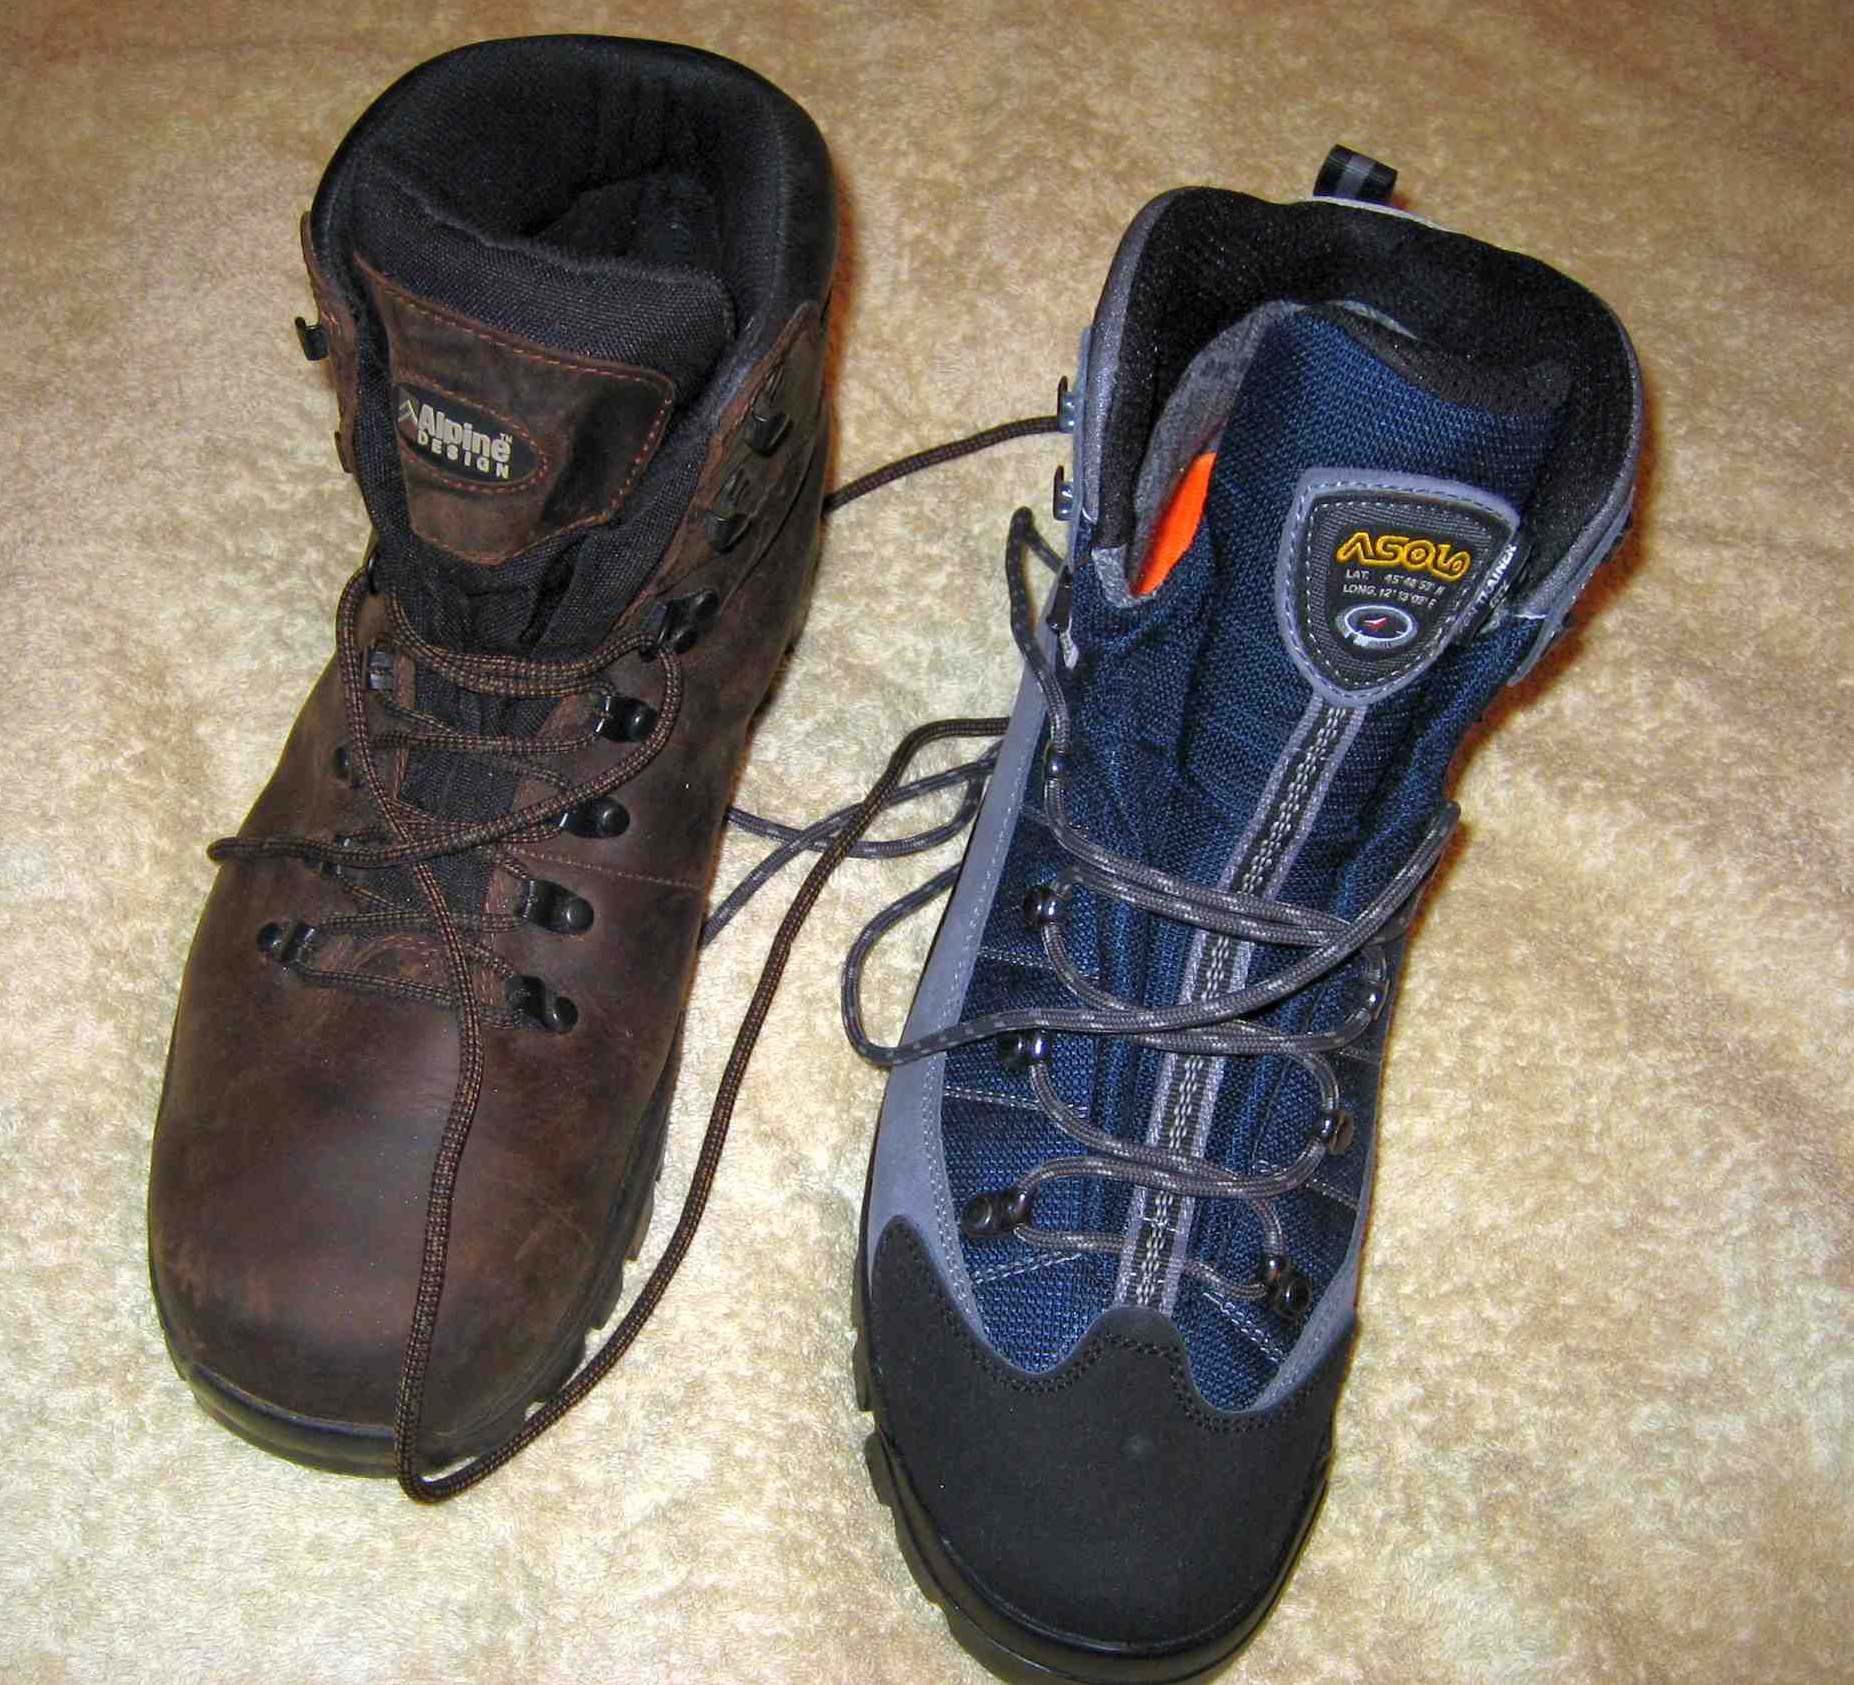 Old and new boots